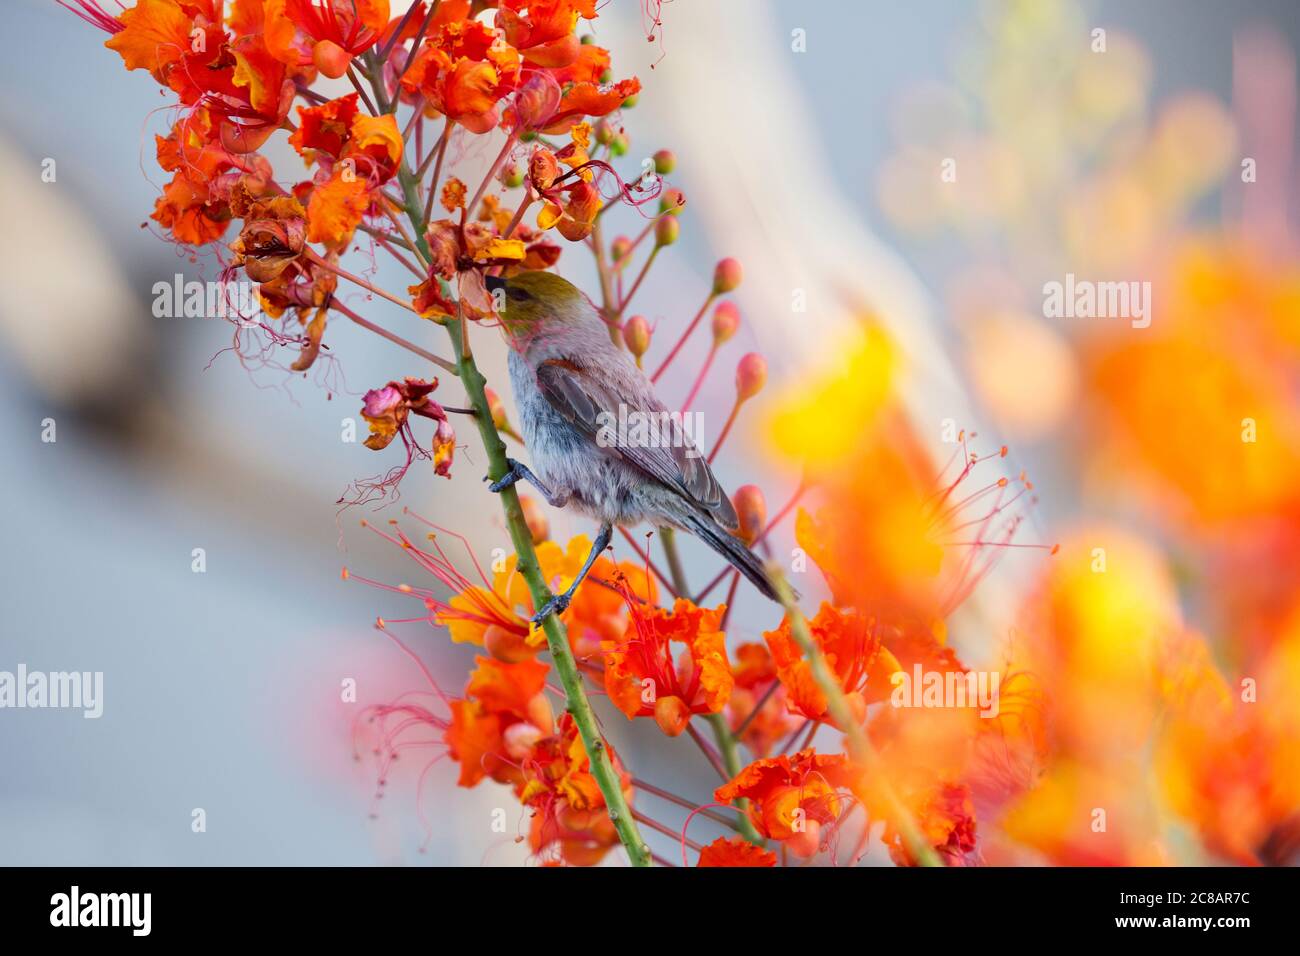 Adult verdin puts beak into blossom to sip nectar from Peacock Flower, also known as Red Bird of Paradise, in the American Southwest. Stock Photo